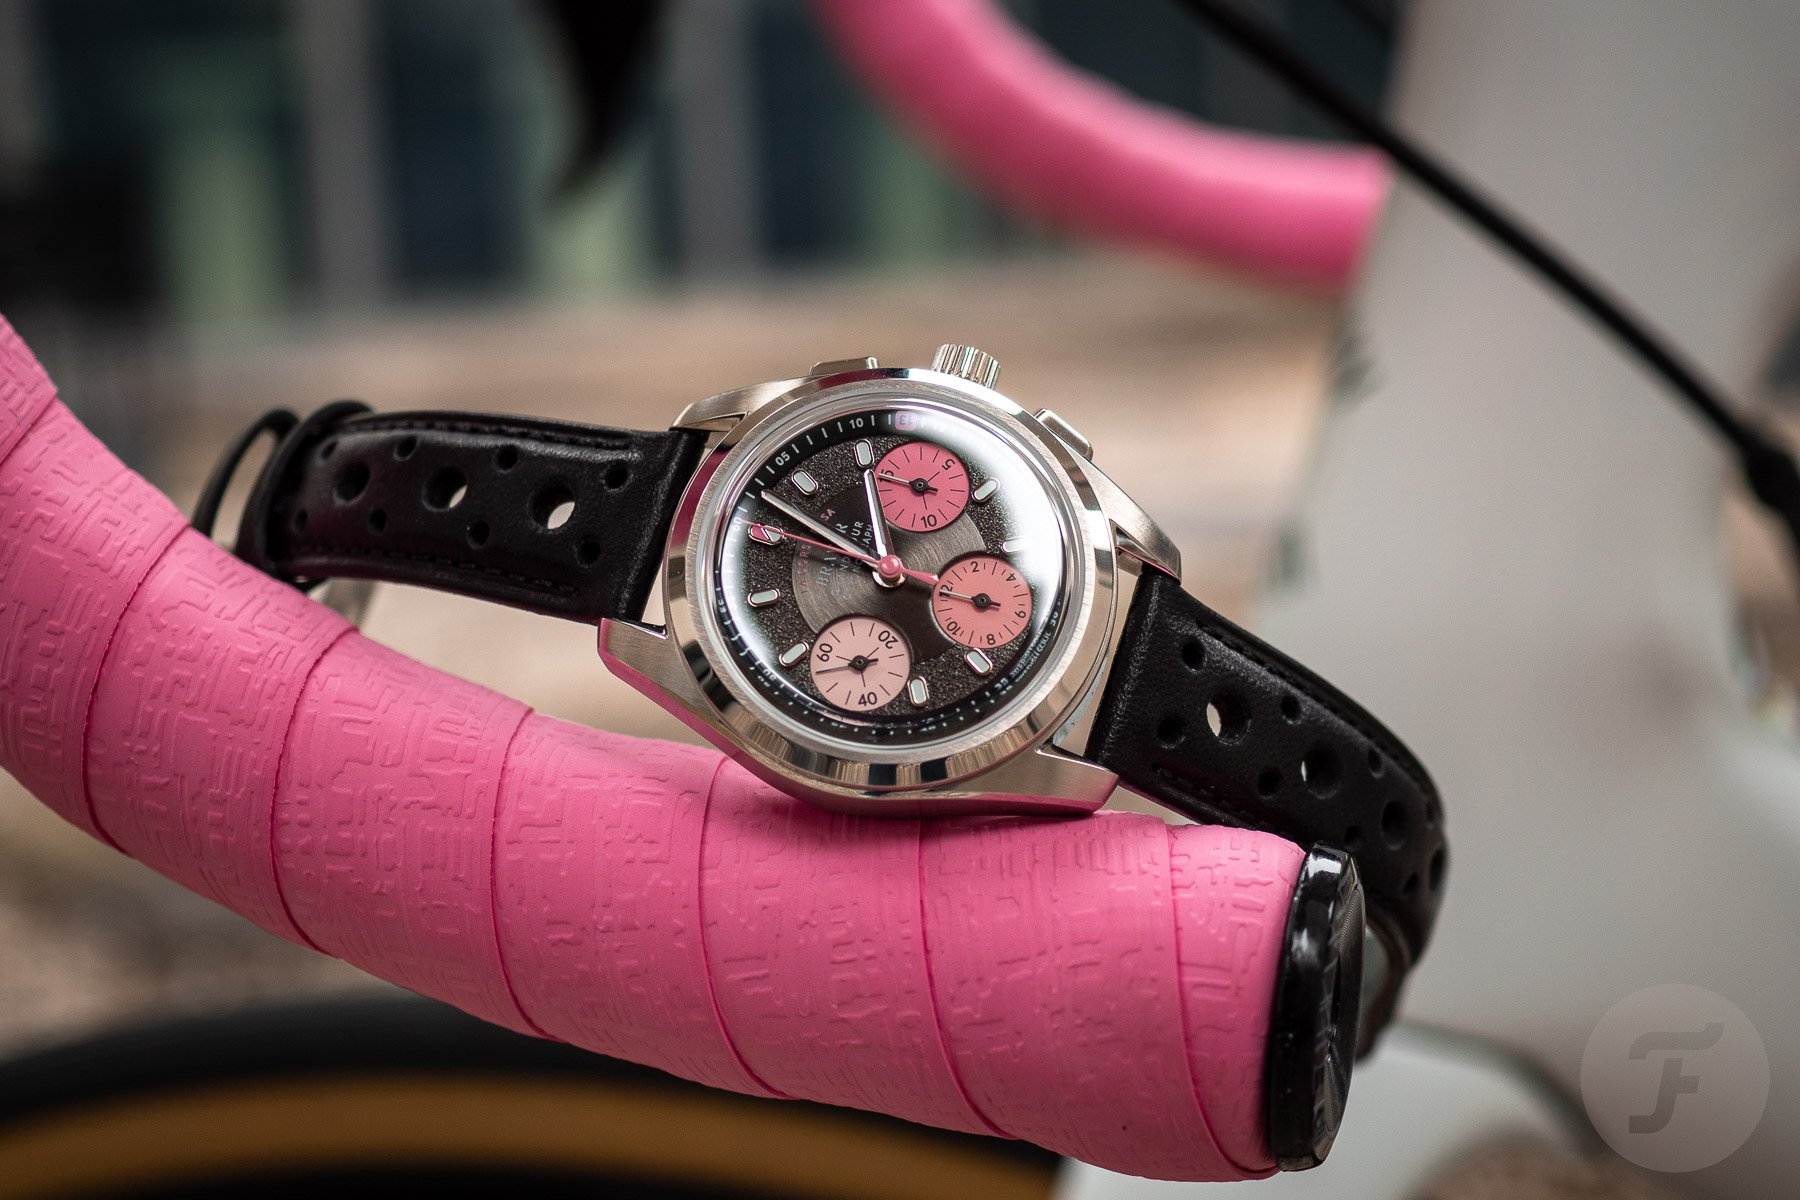 Hands-On With The Citizen Super Titanium Eco-Drive Chrono And Day-Date